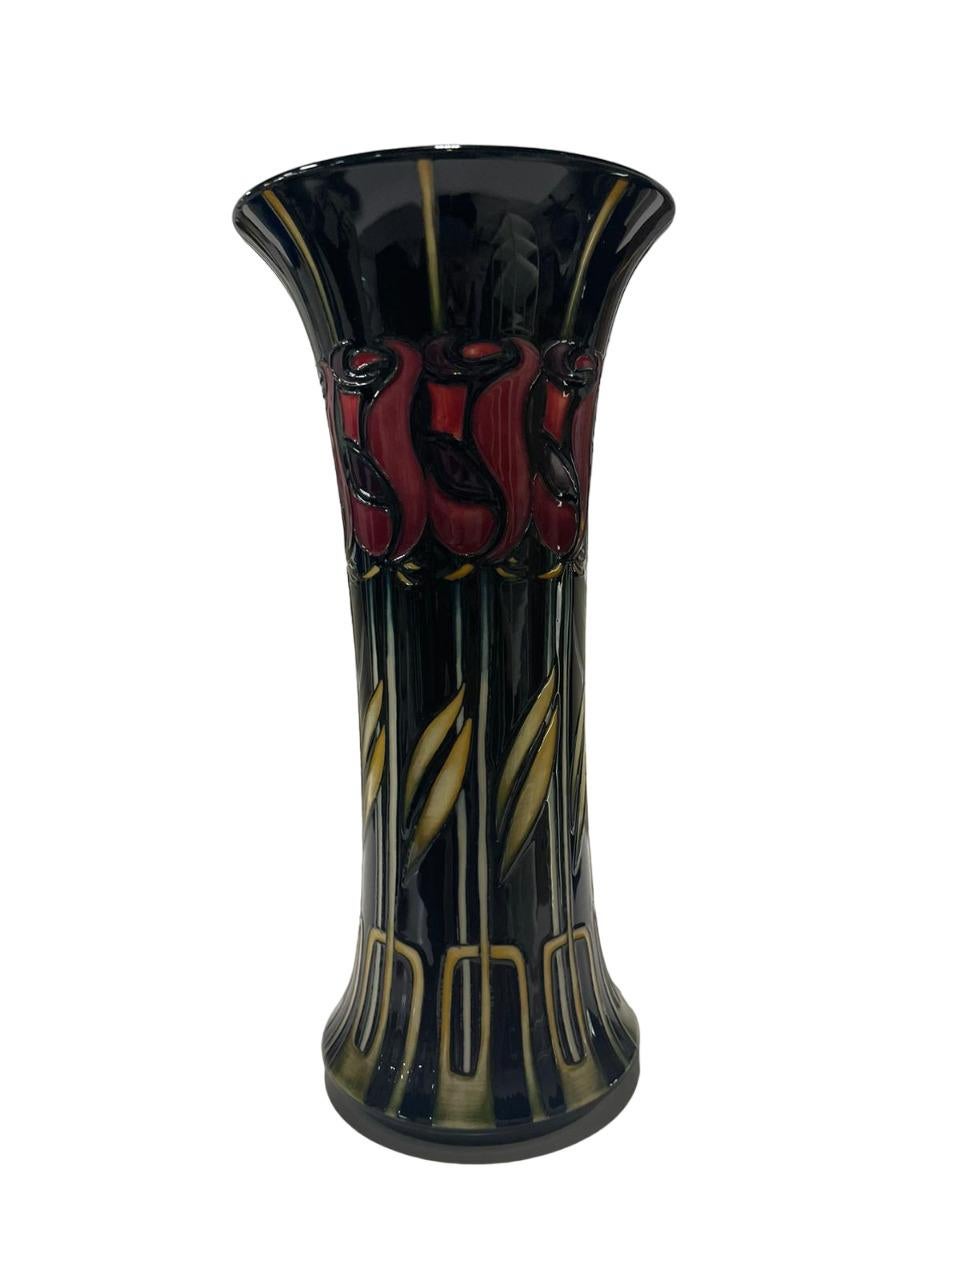 Contemporary DISCONTINUED MOORCROFT Night ROSE pattern by Nicola Slaney, dated 2000. Boxed For Sale